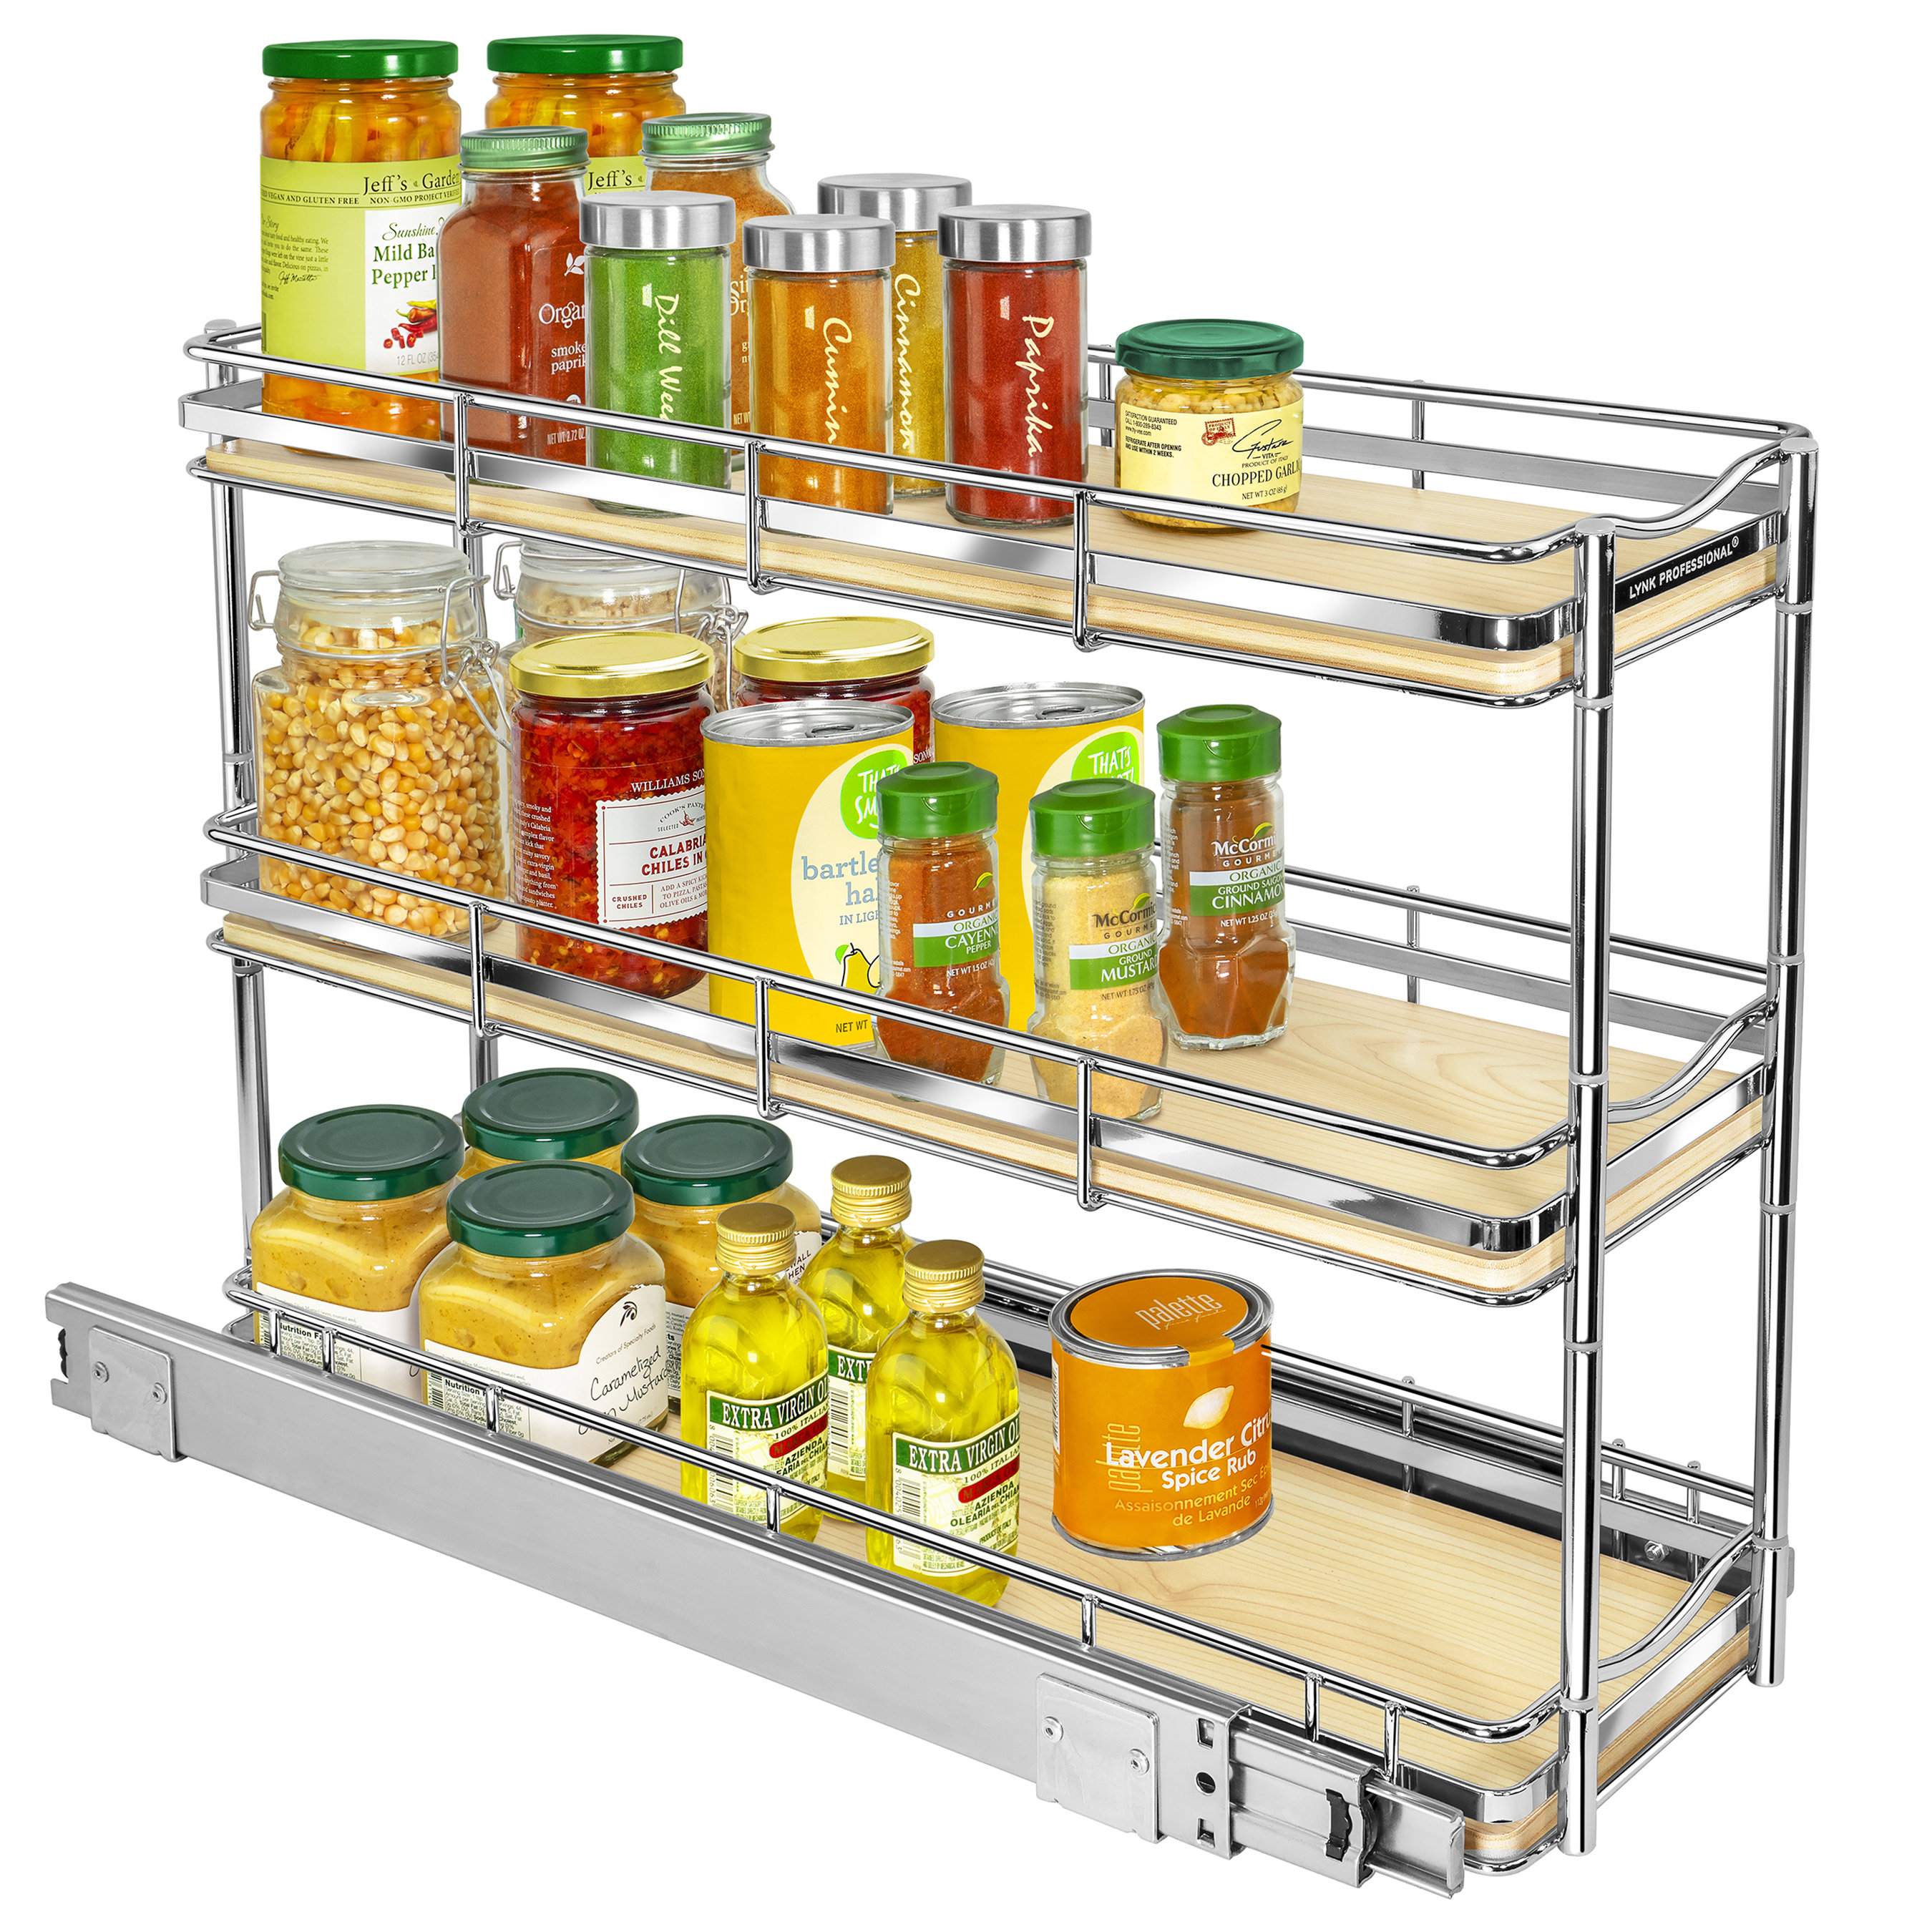 15-1/4 Spice Tray Organizer for Drawers